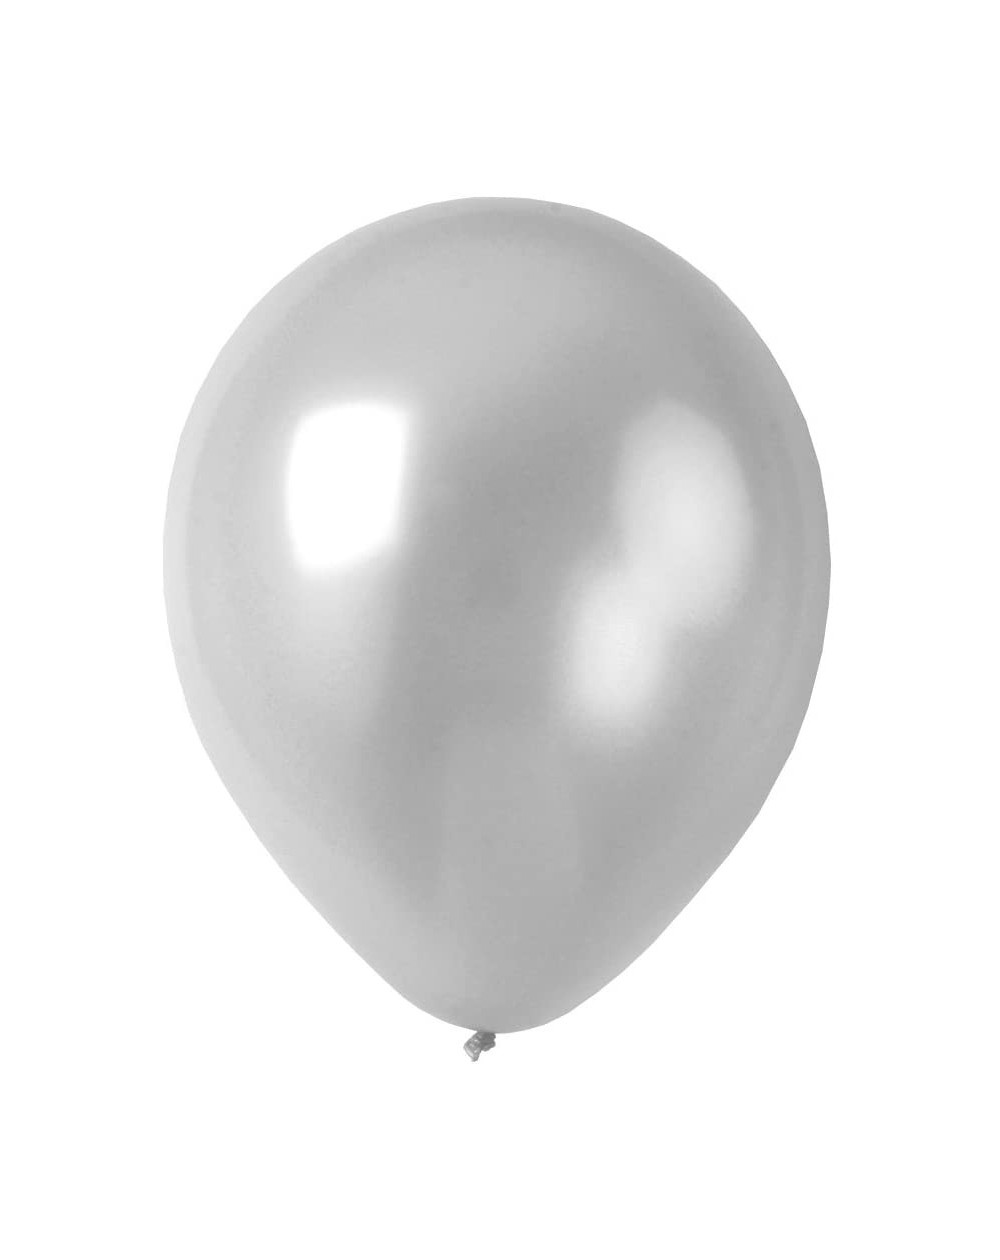 Balloons 12" Solid Metallic Silver Latex Balloons 50-Pack Multiple Colors Available by Supplies Party - Silver - CH12FHSAHBR ...